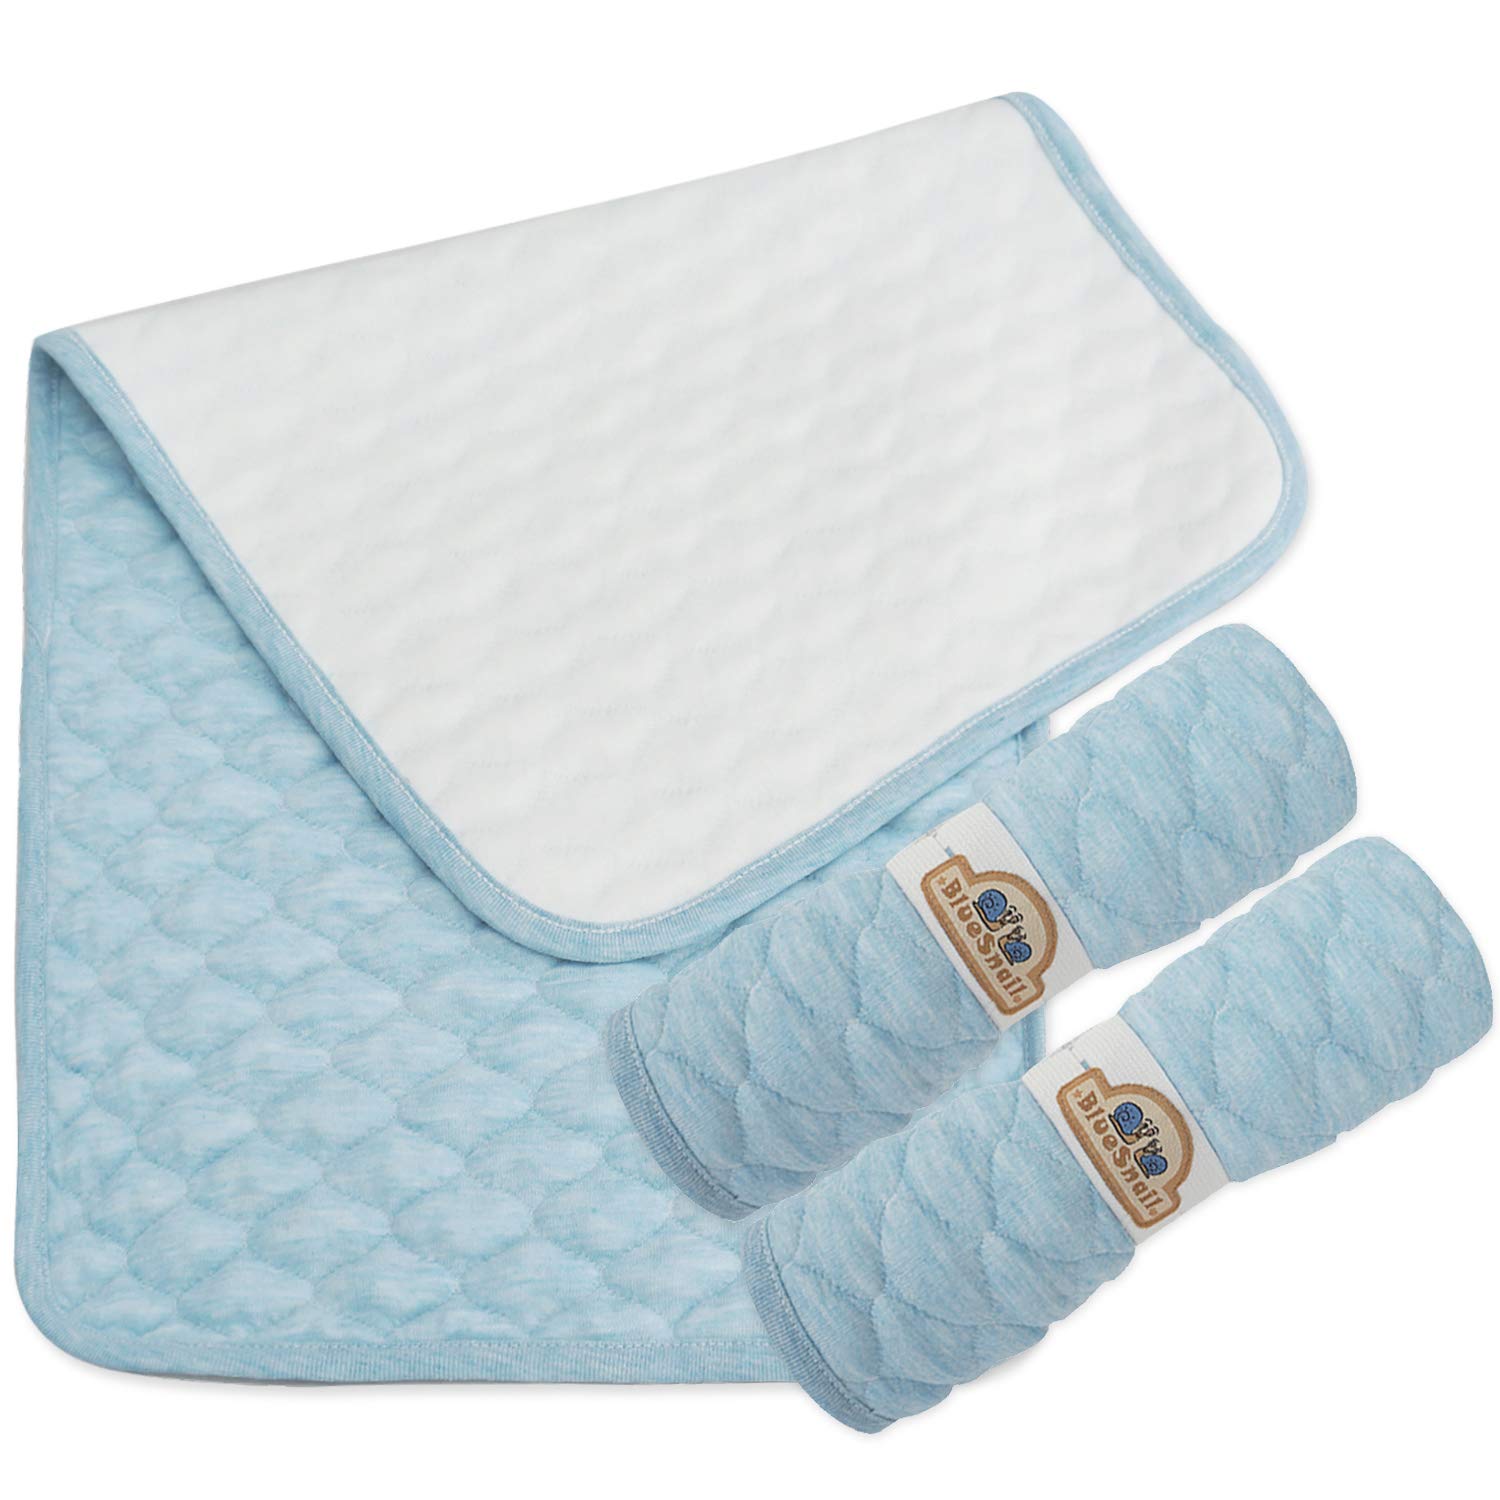 US$ 15.95 - BlueSnail Bamboo Quilted Thicker Waterproof Changing 